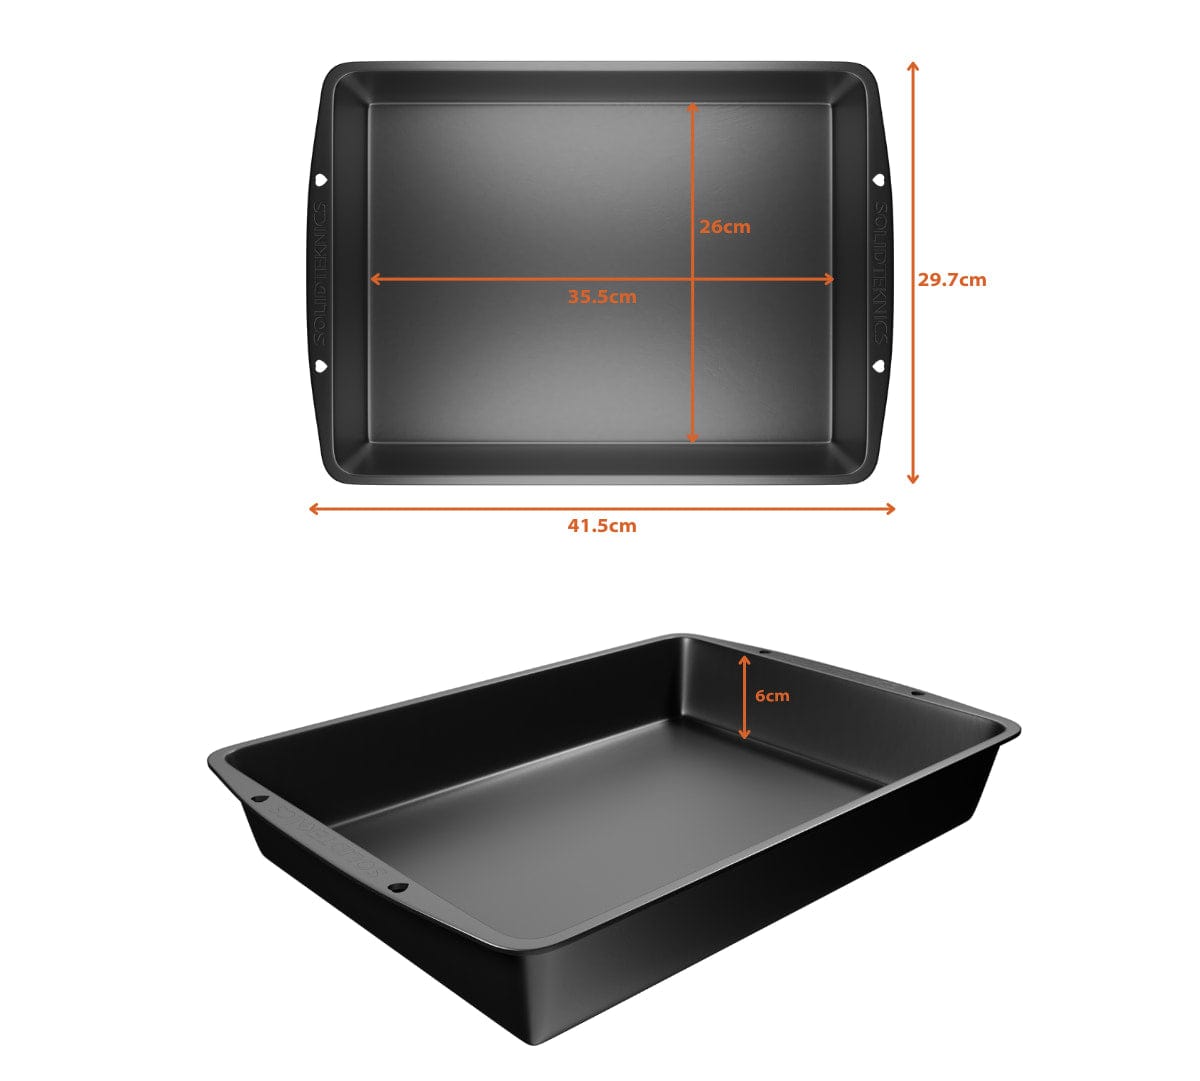 Solidteknics QUENCHED Roasting Pan 405mm x 310mm